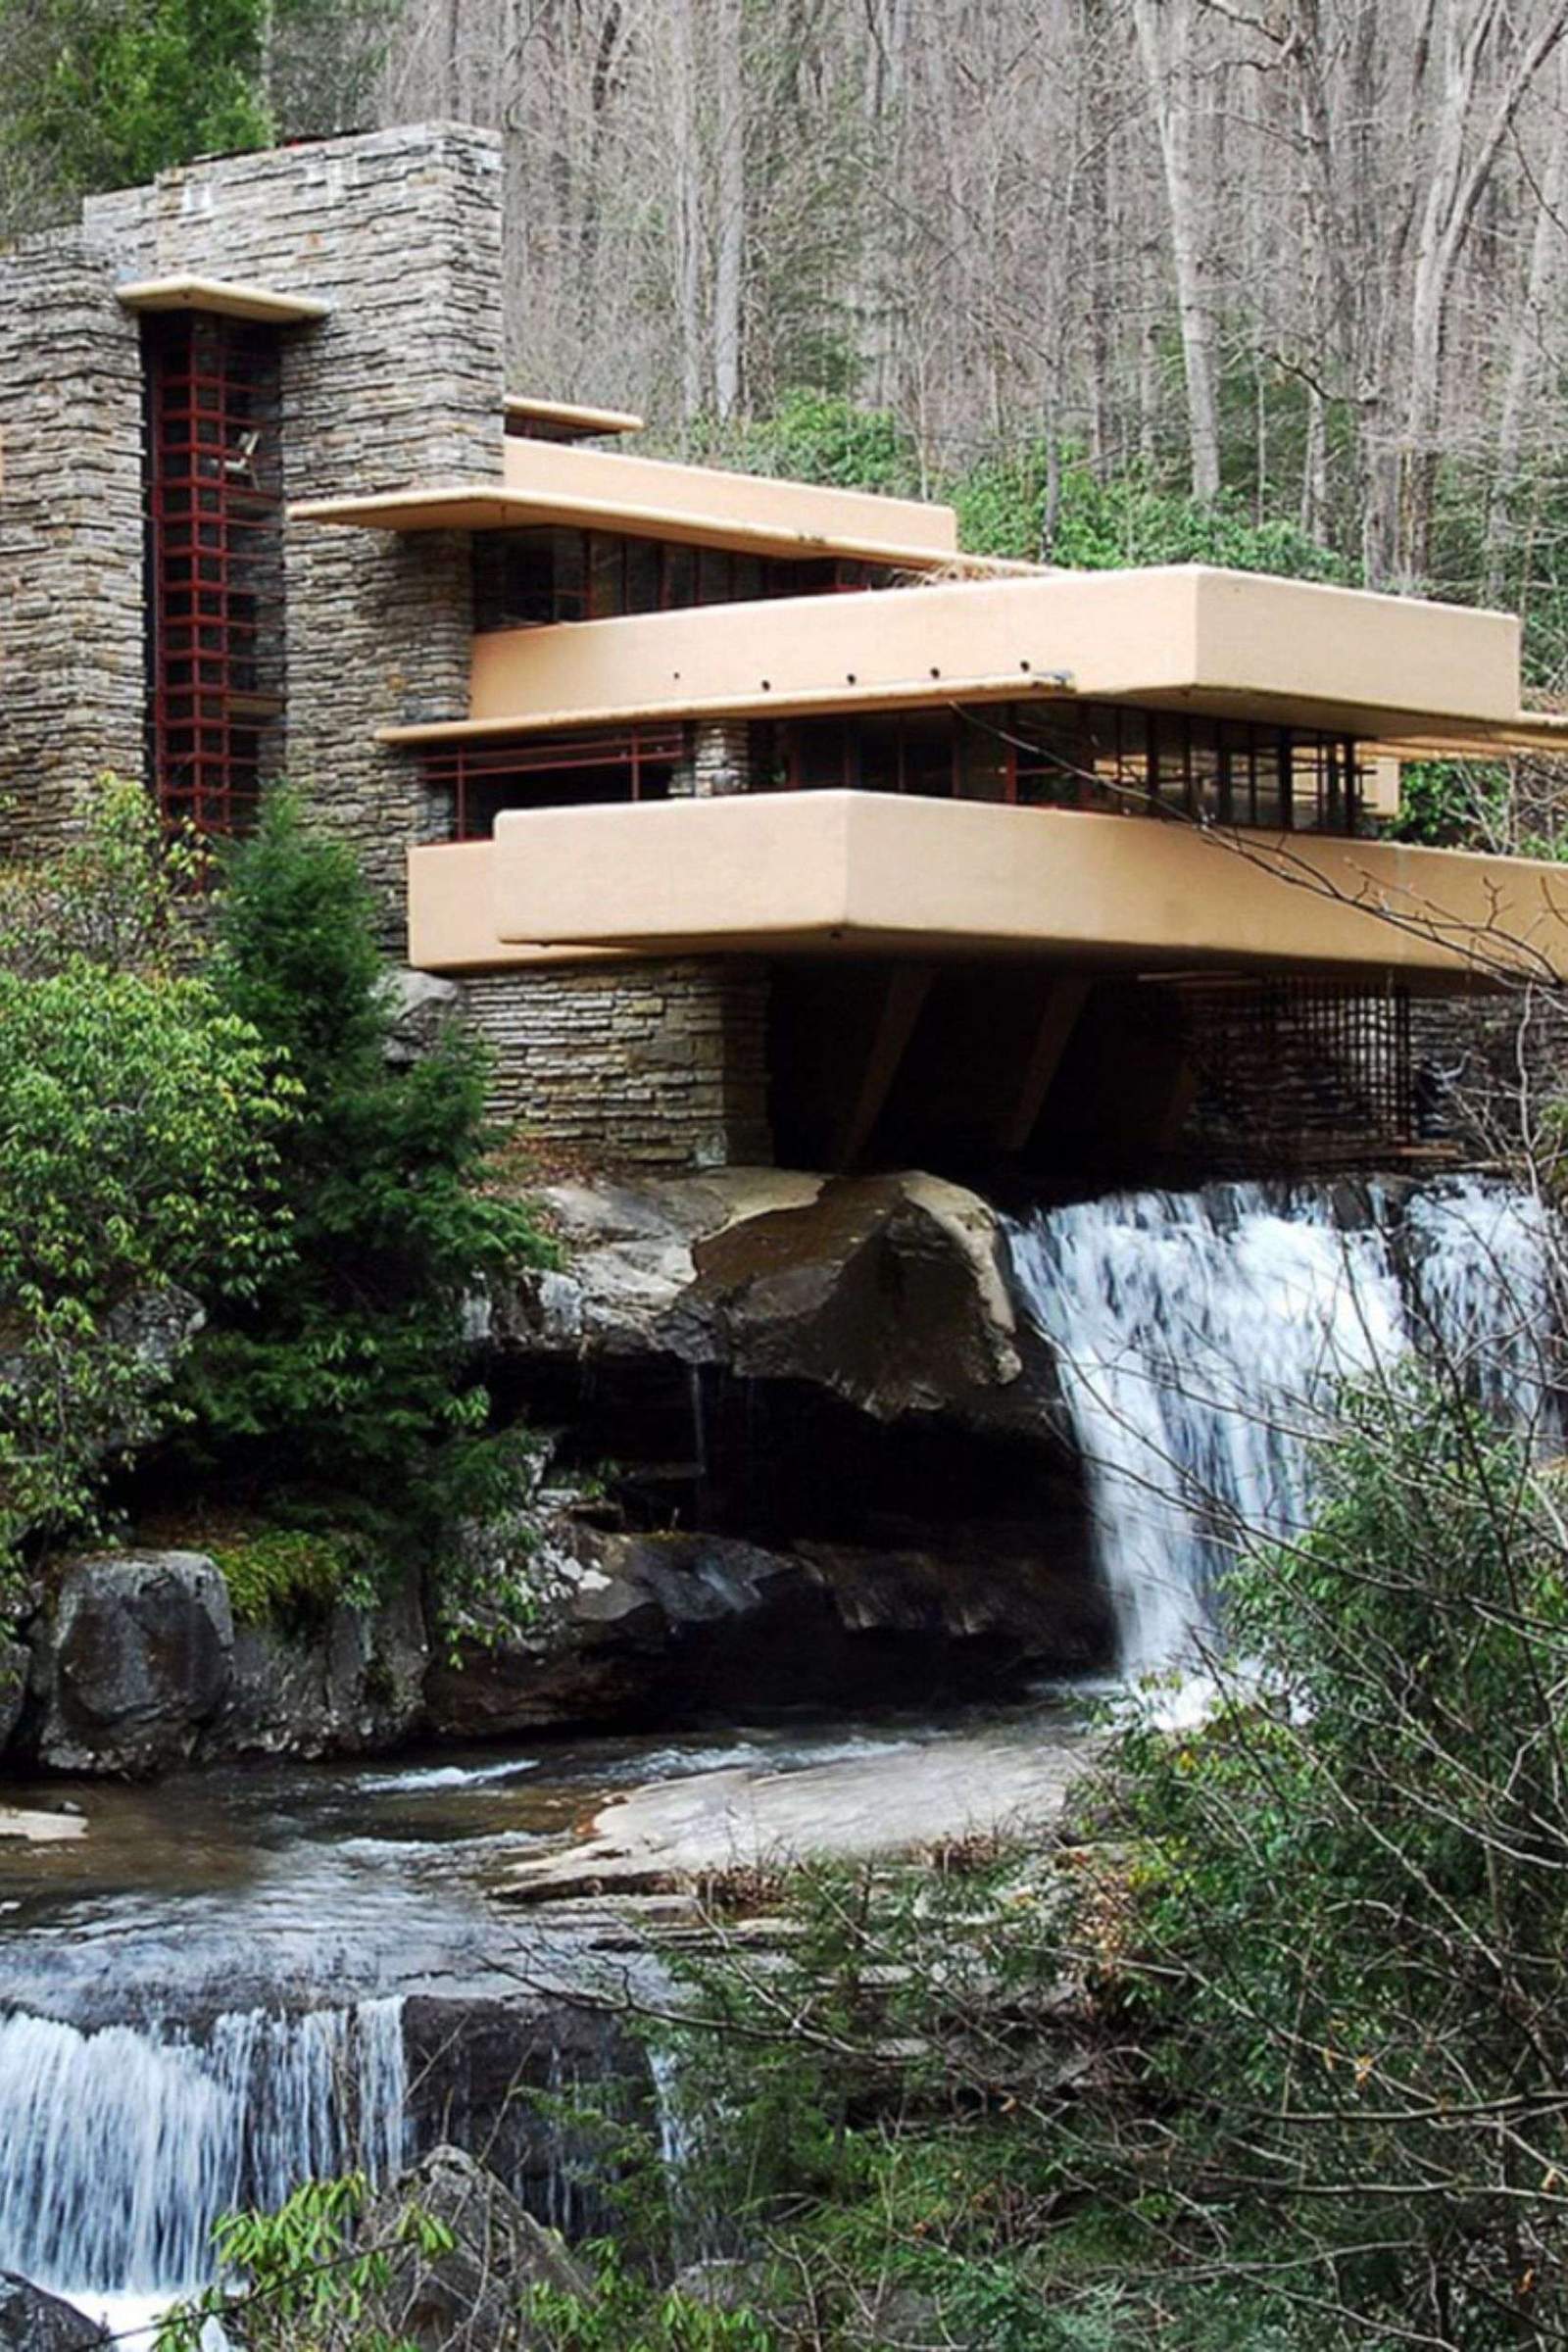 12 Frank Lloyd Wright buildings are now hosting virtual tours